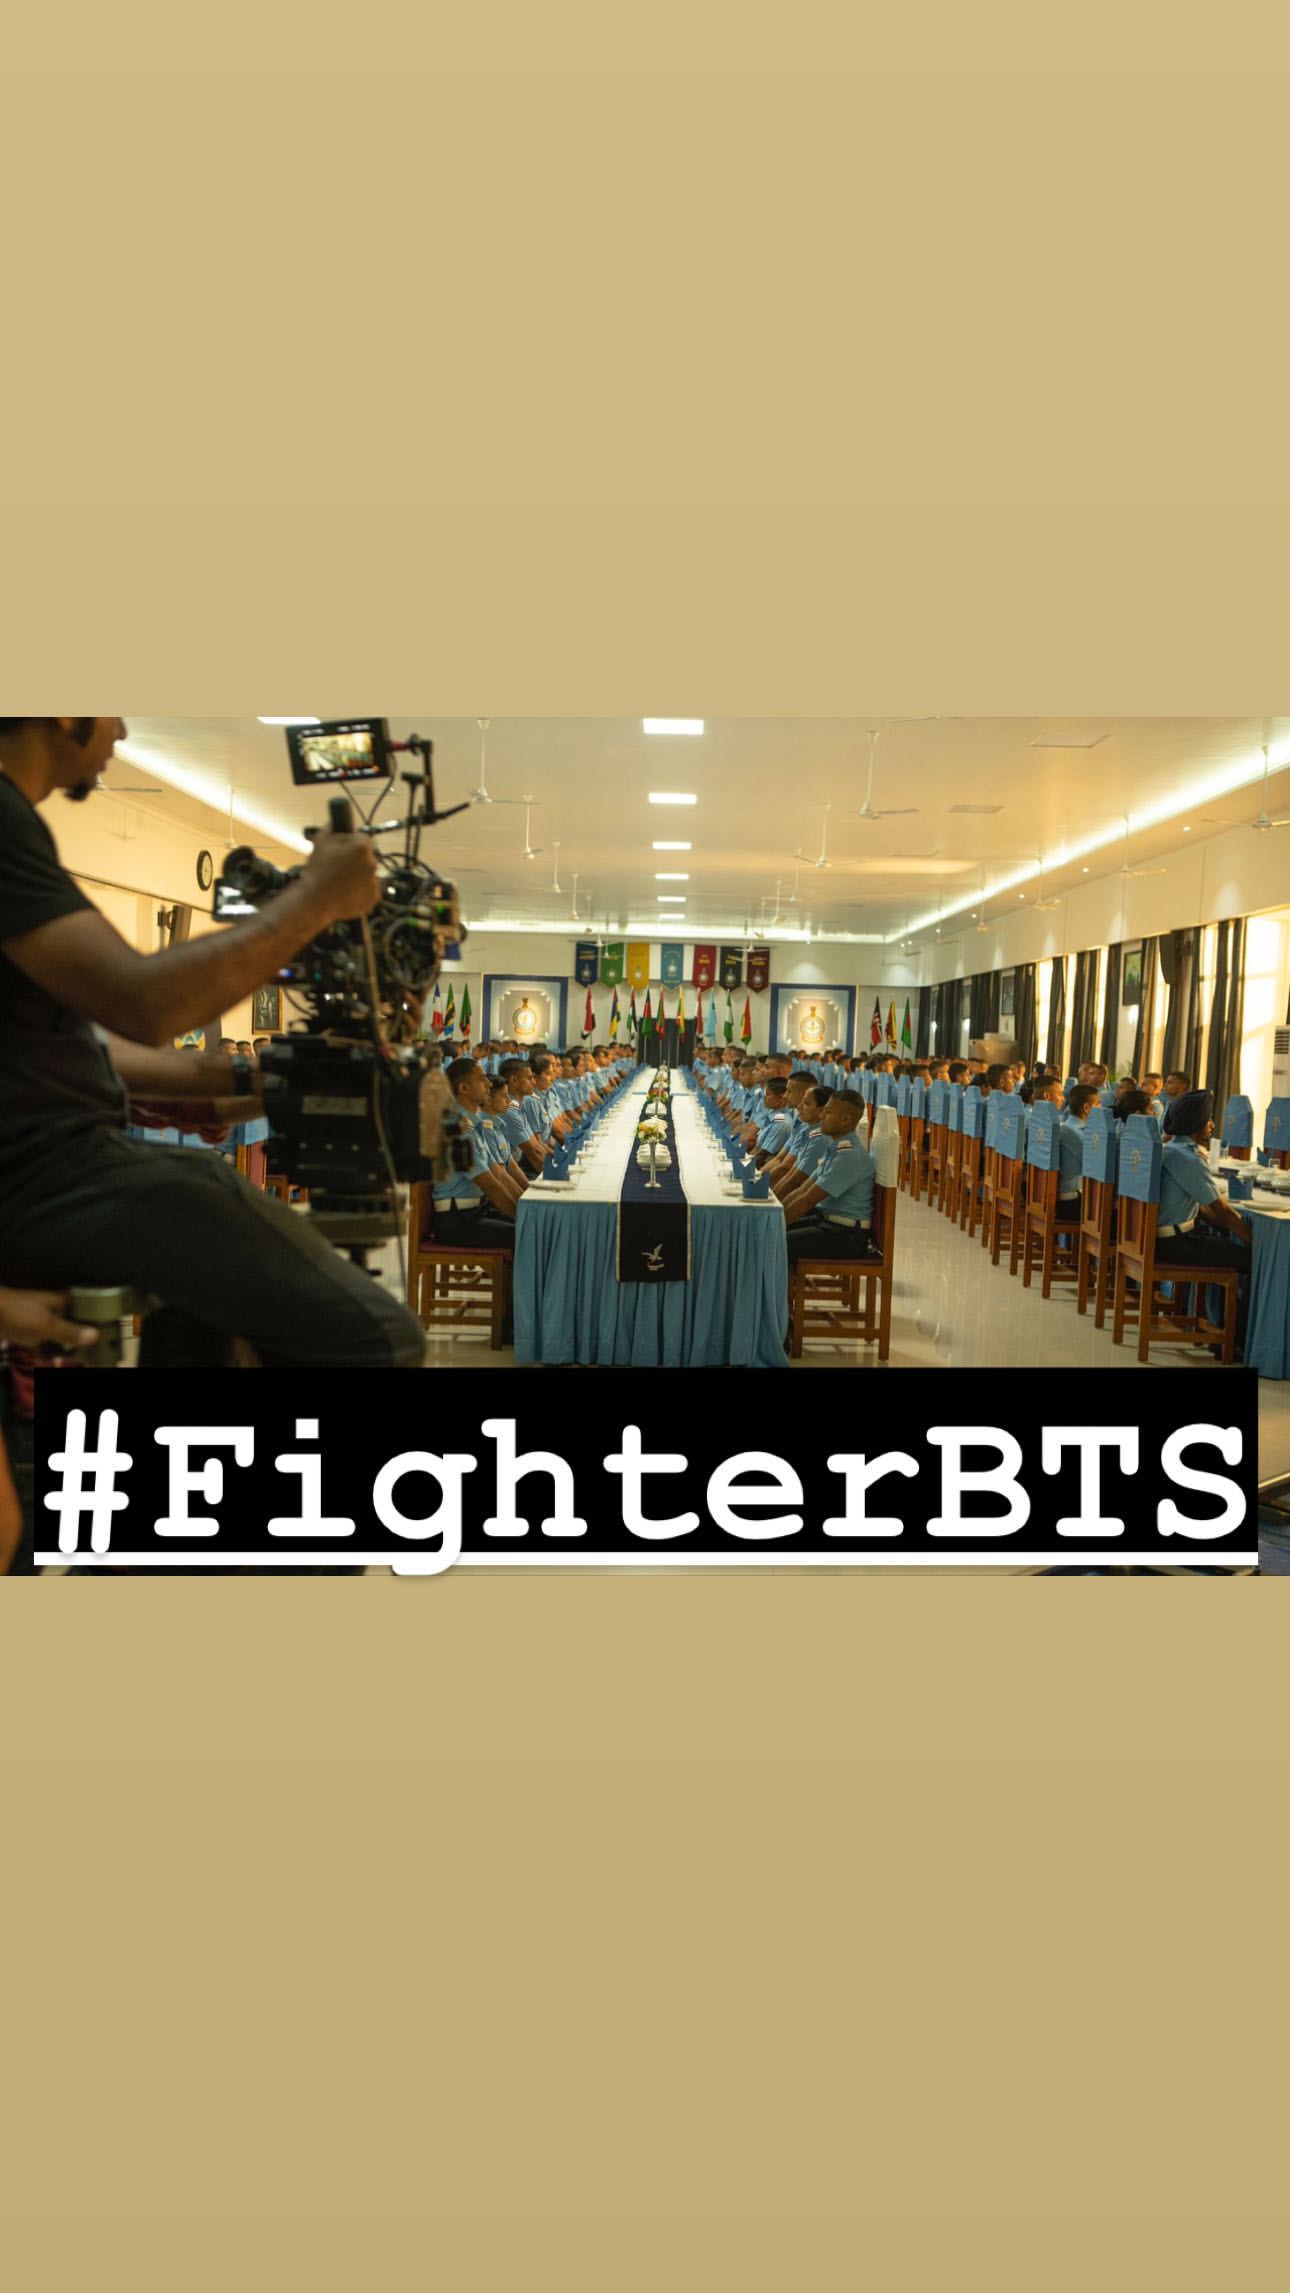 Siddharth Anand shares Fighter BTS